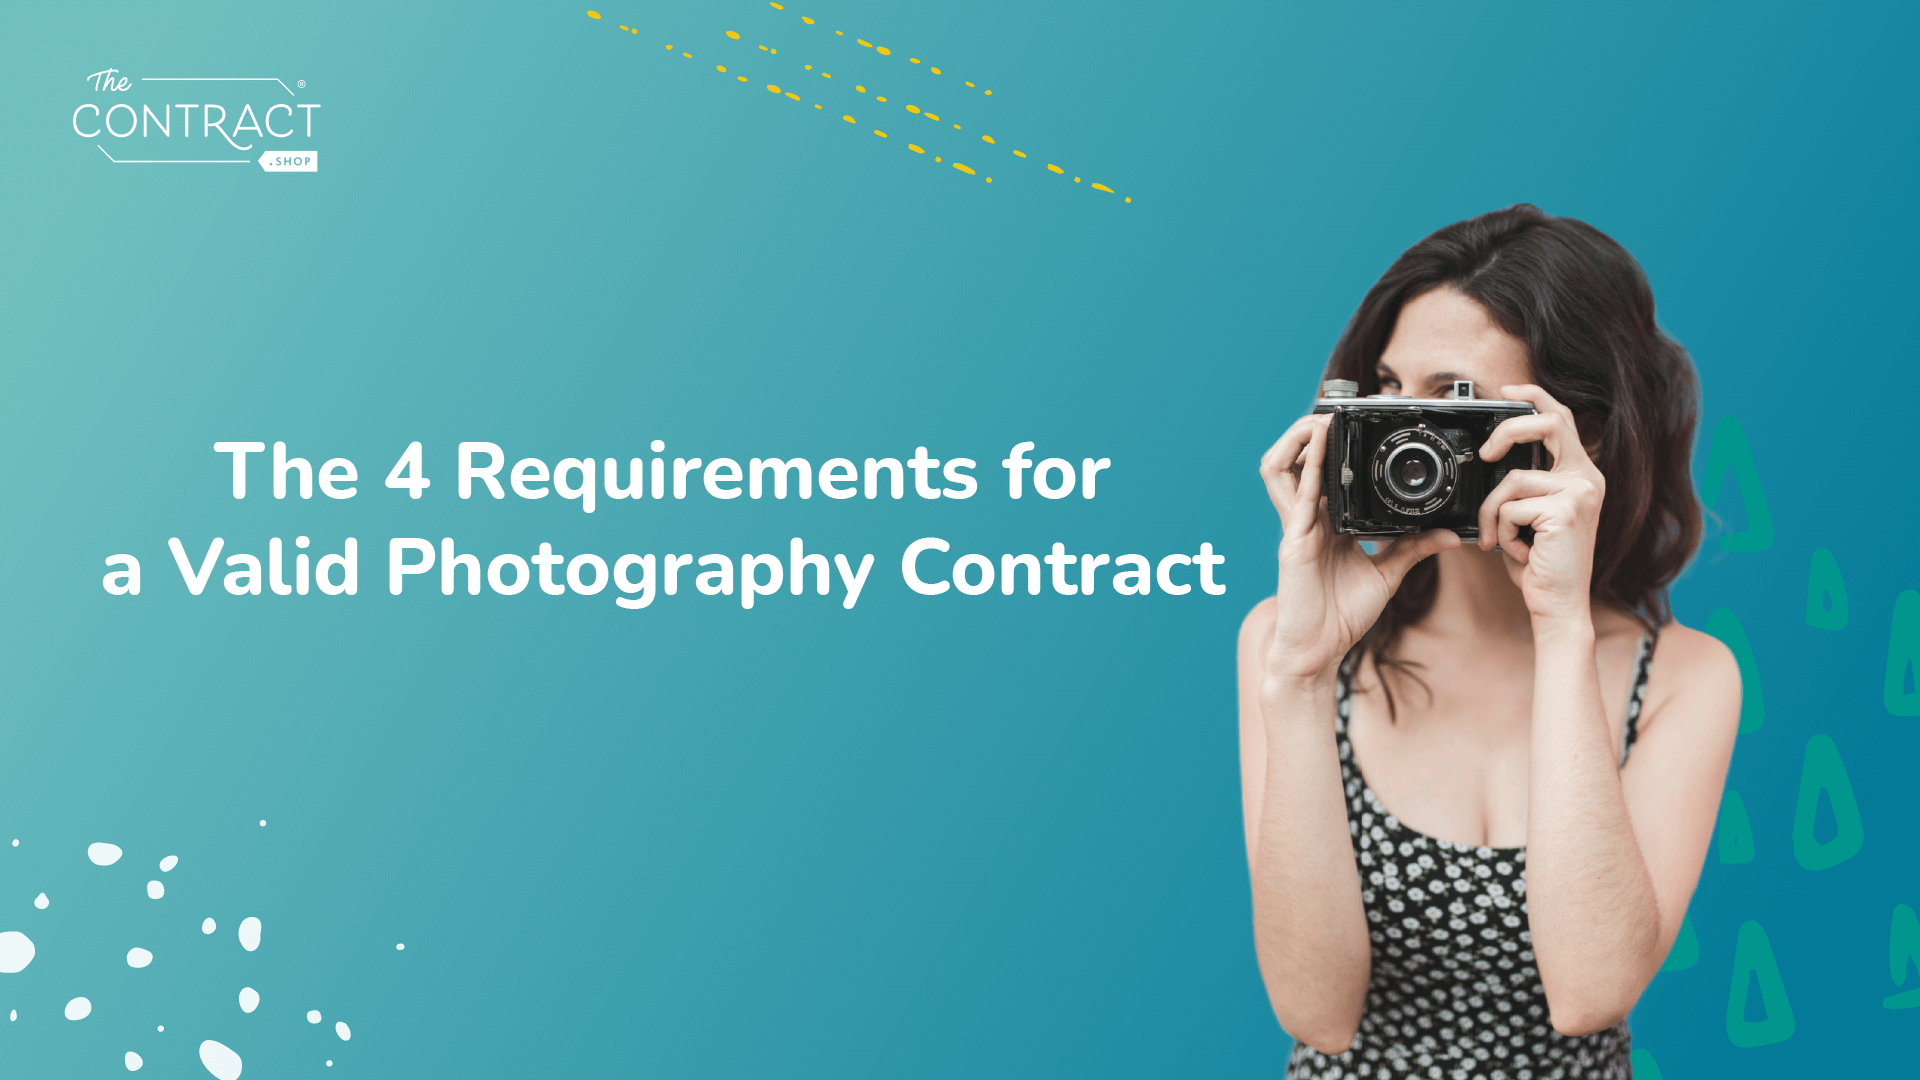 The 4 Requirements for a Valid Photography Contract